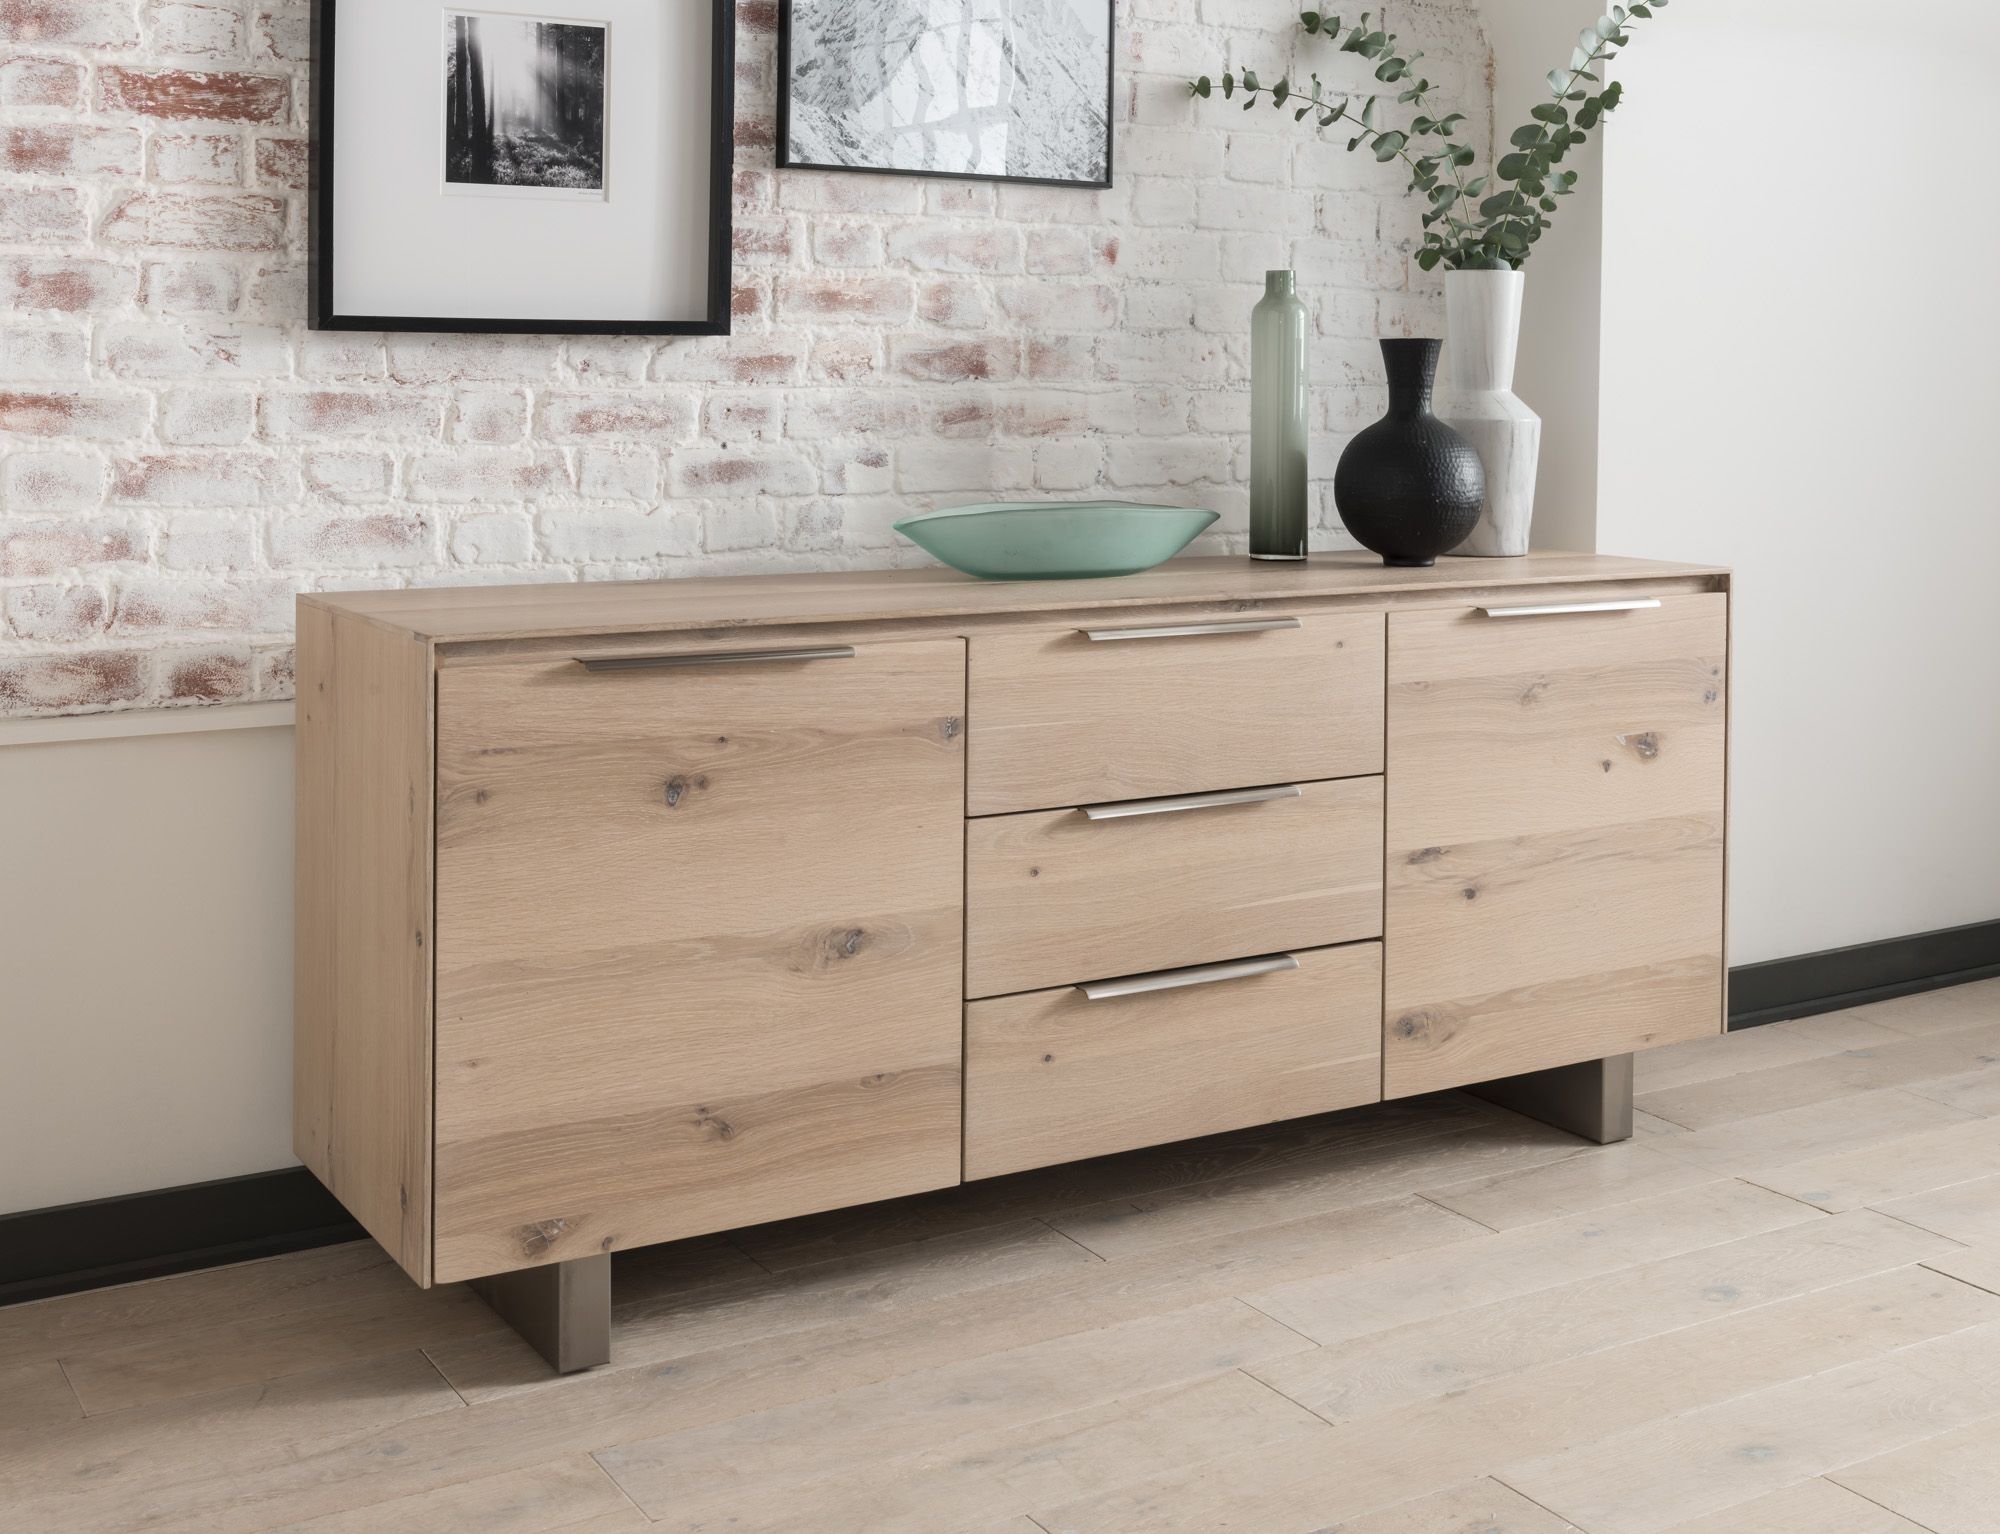 Capua White Washed Oak Sideboard 18vd175 Pertaining To 2 Door White Wash Sideboards (View 27 of 30)